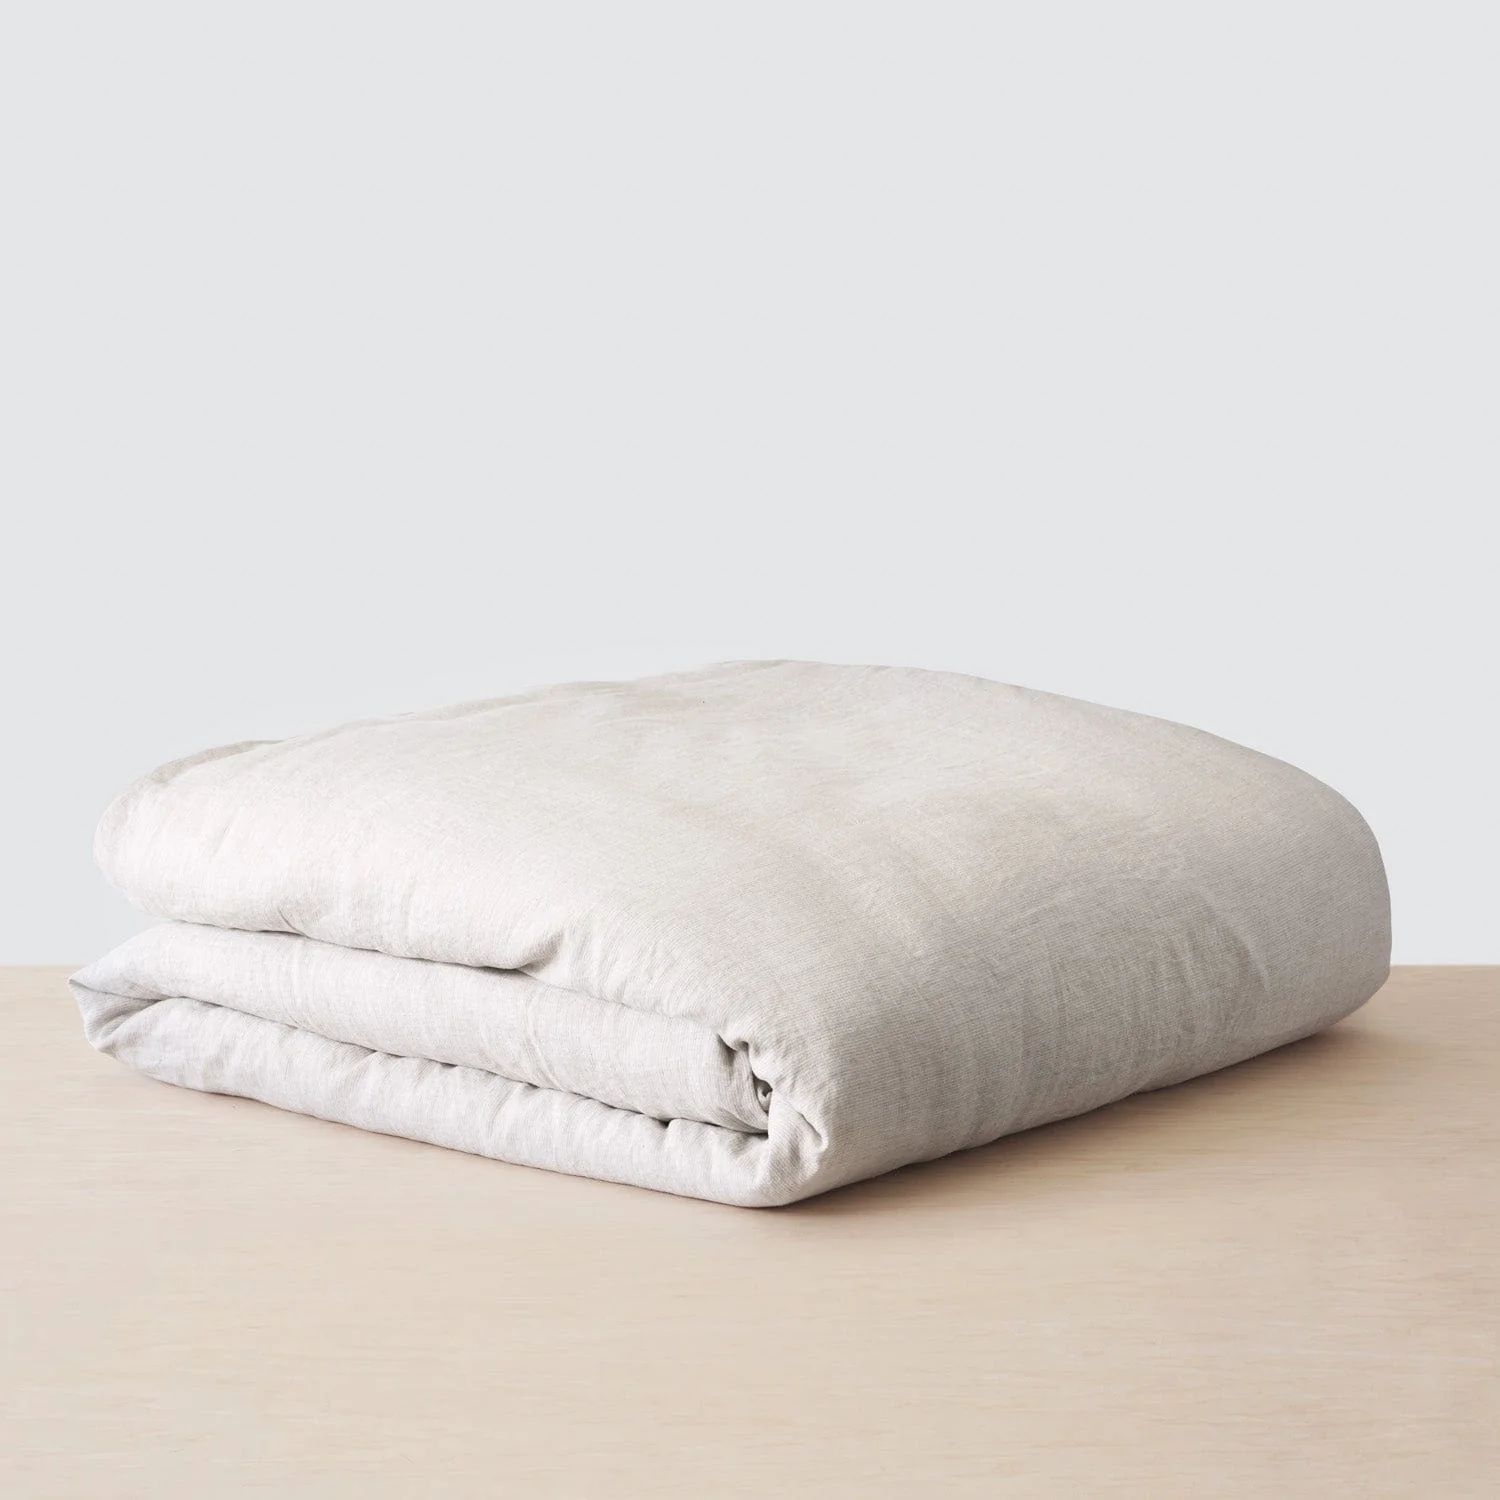 Stonewashed Linen Bed Bundle - Earth Series | The Citizenry